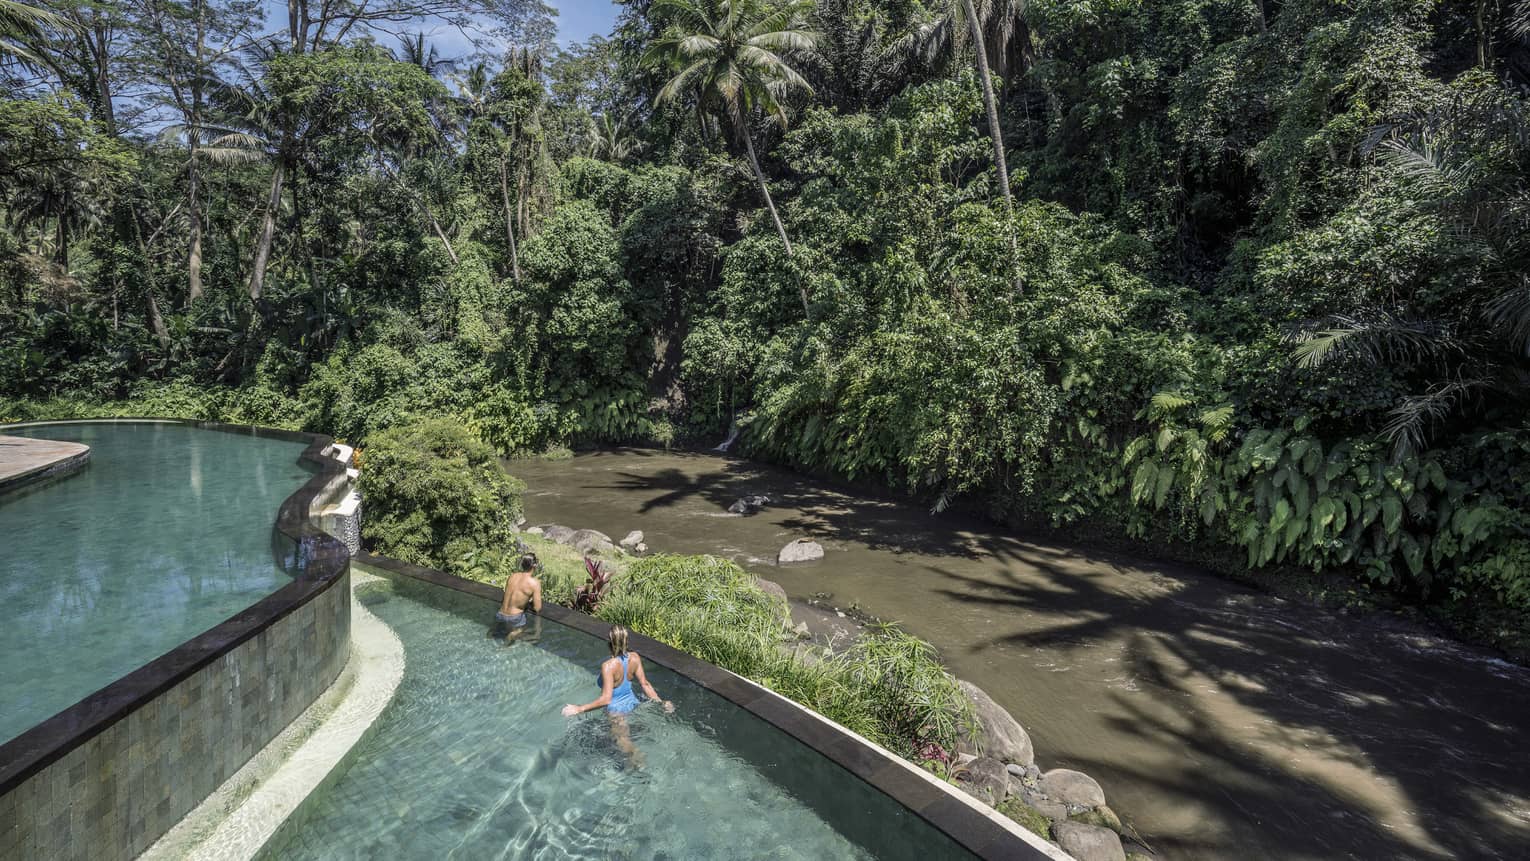 Hotel guests swimming in a pool, overlooking a river in Bali